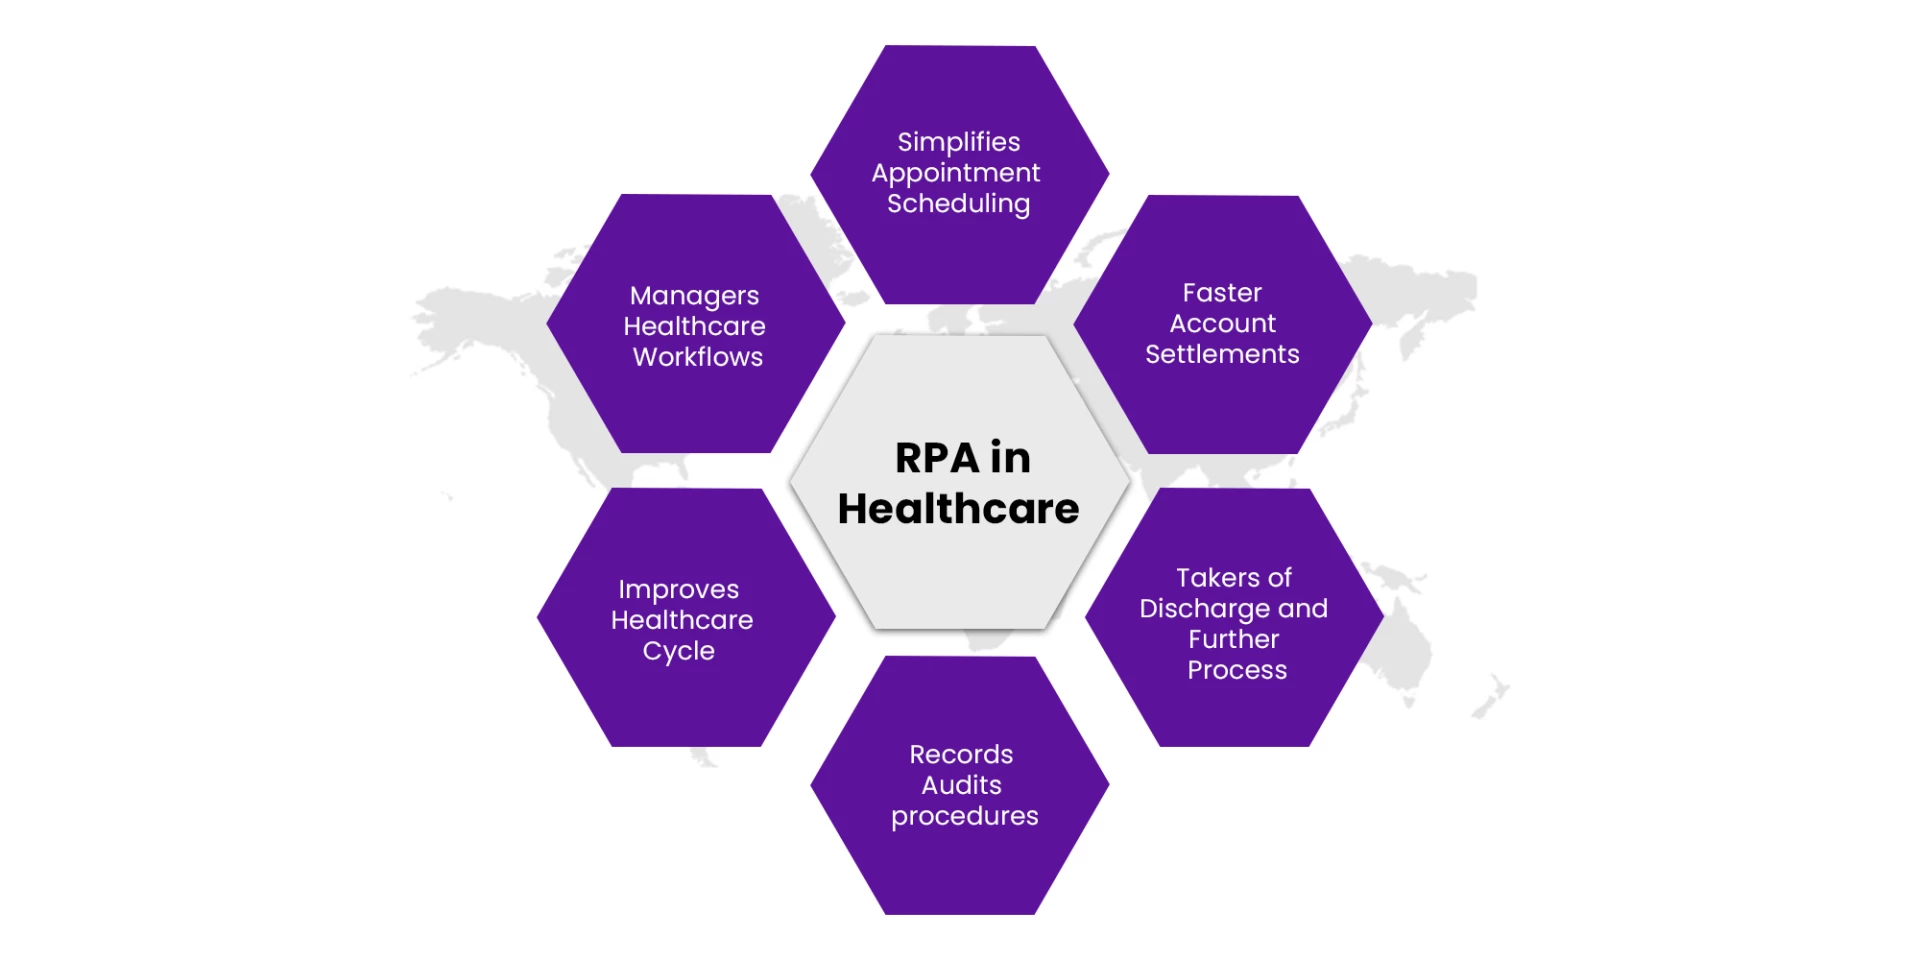 Implementation of RPA in Claims Processes